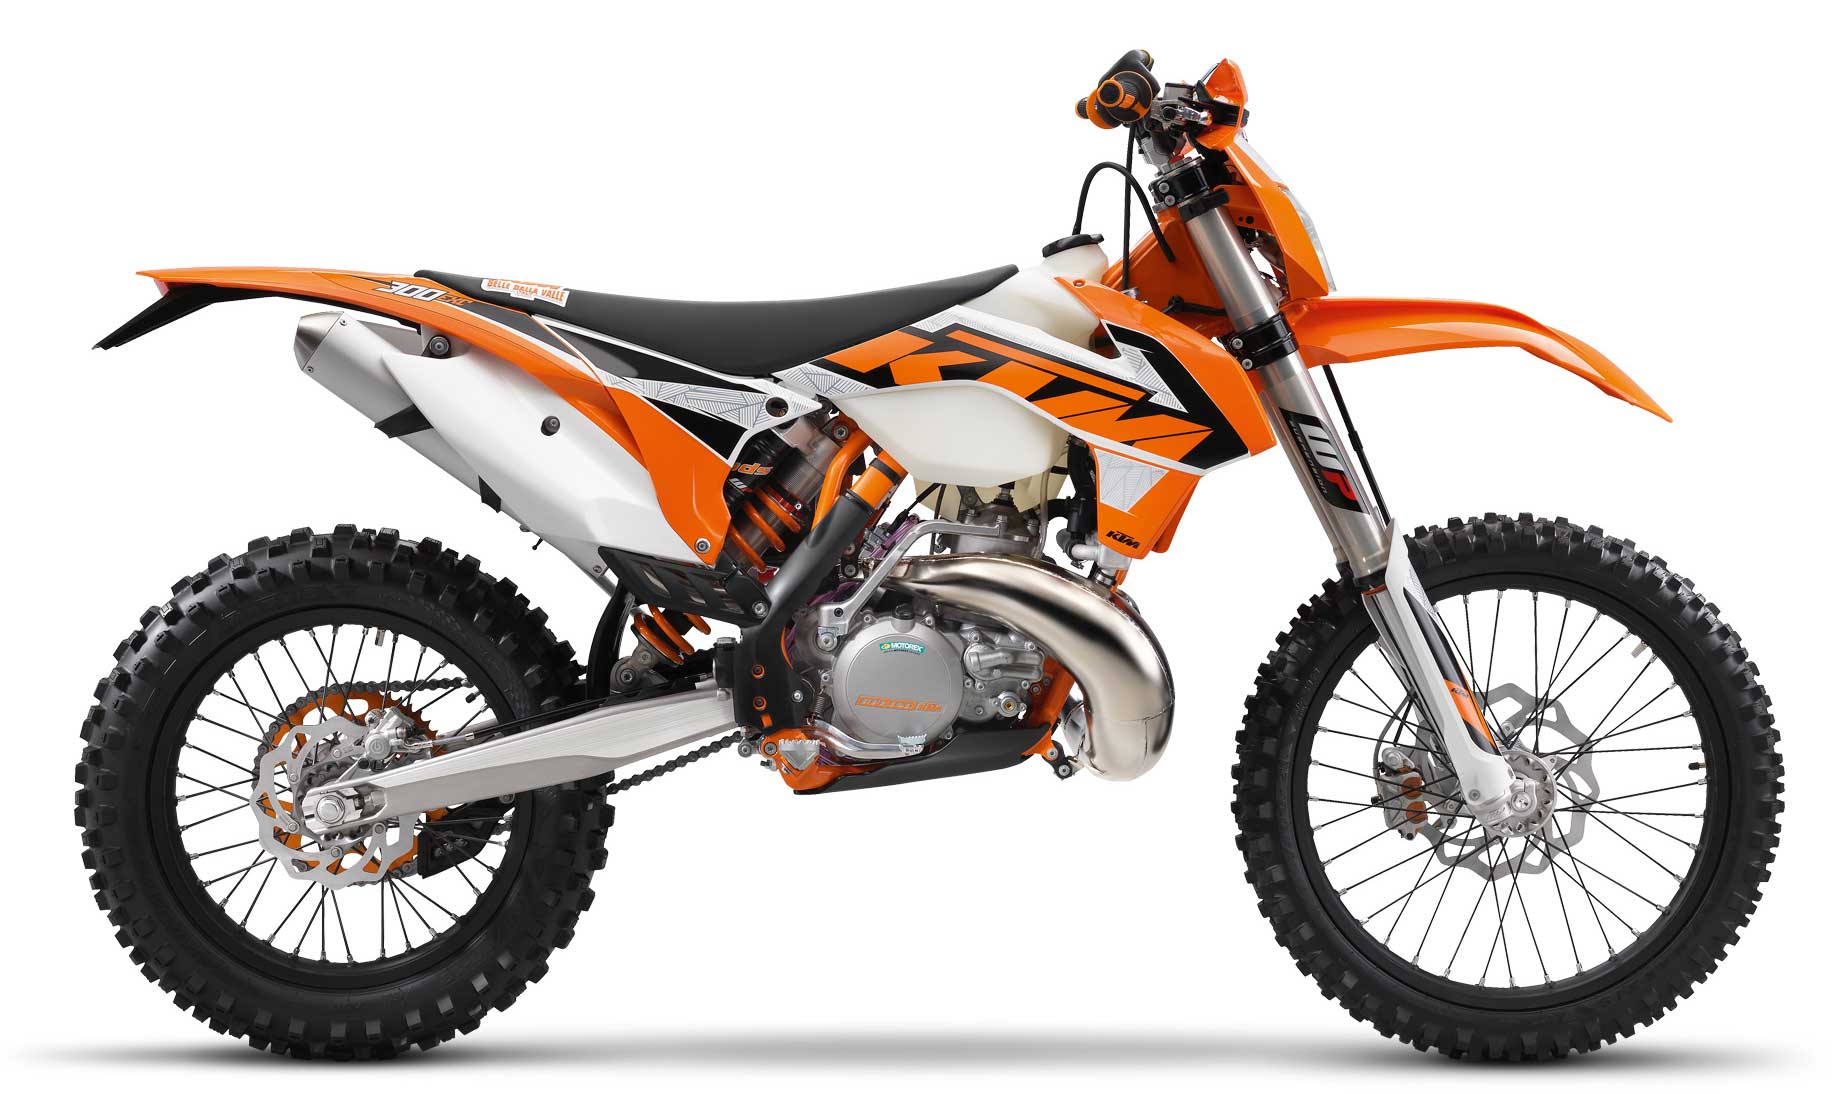 KTM 300 EXC side view